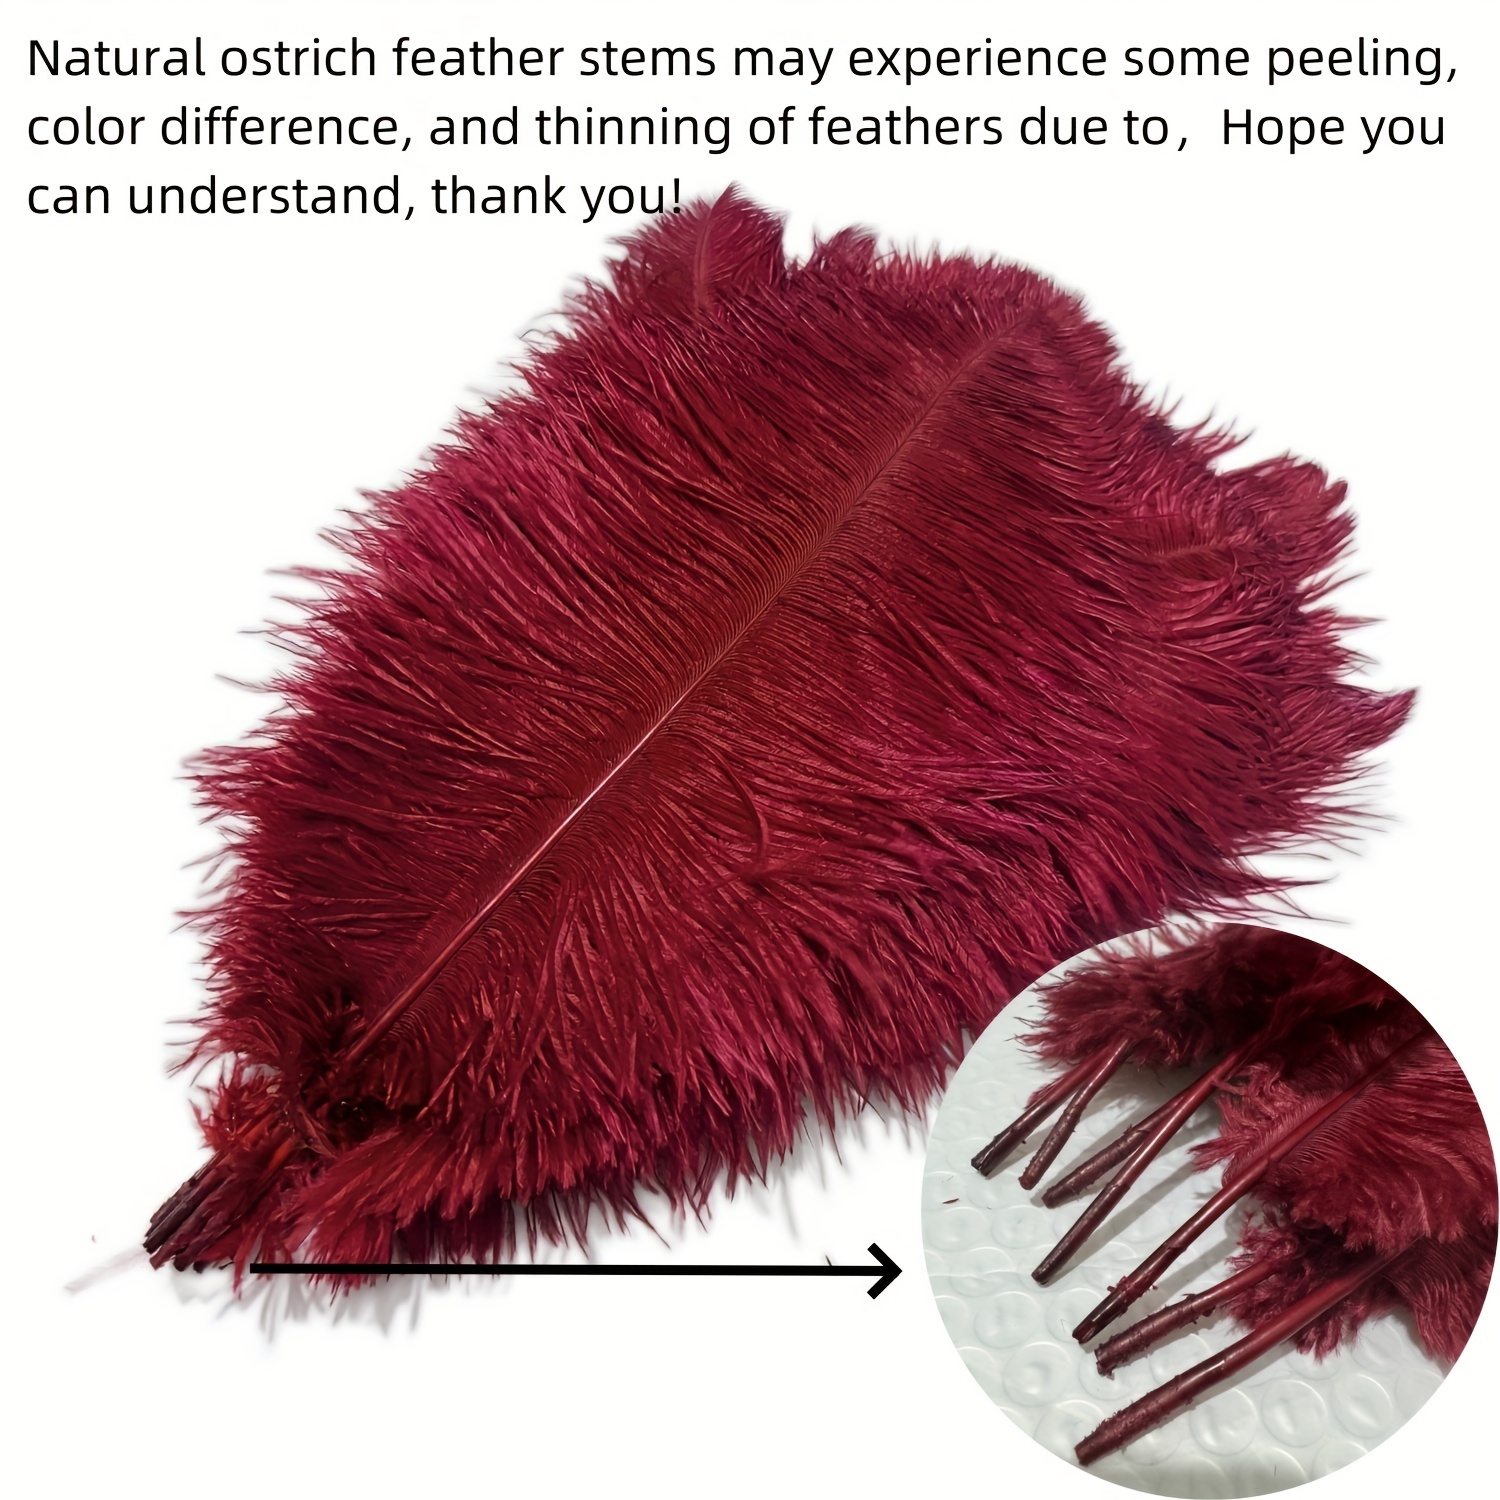 50Pcs Natural Ostrich Feathers DIY Craft Plume Feather Home Wedding  Centerpieces Party Decoration Feather (Hot Pink,15-20cm/6-8inch)